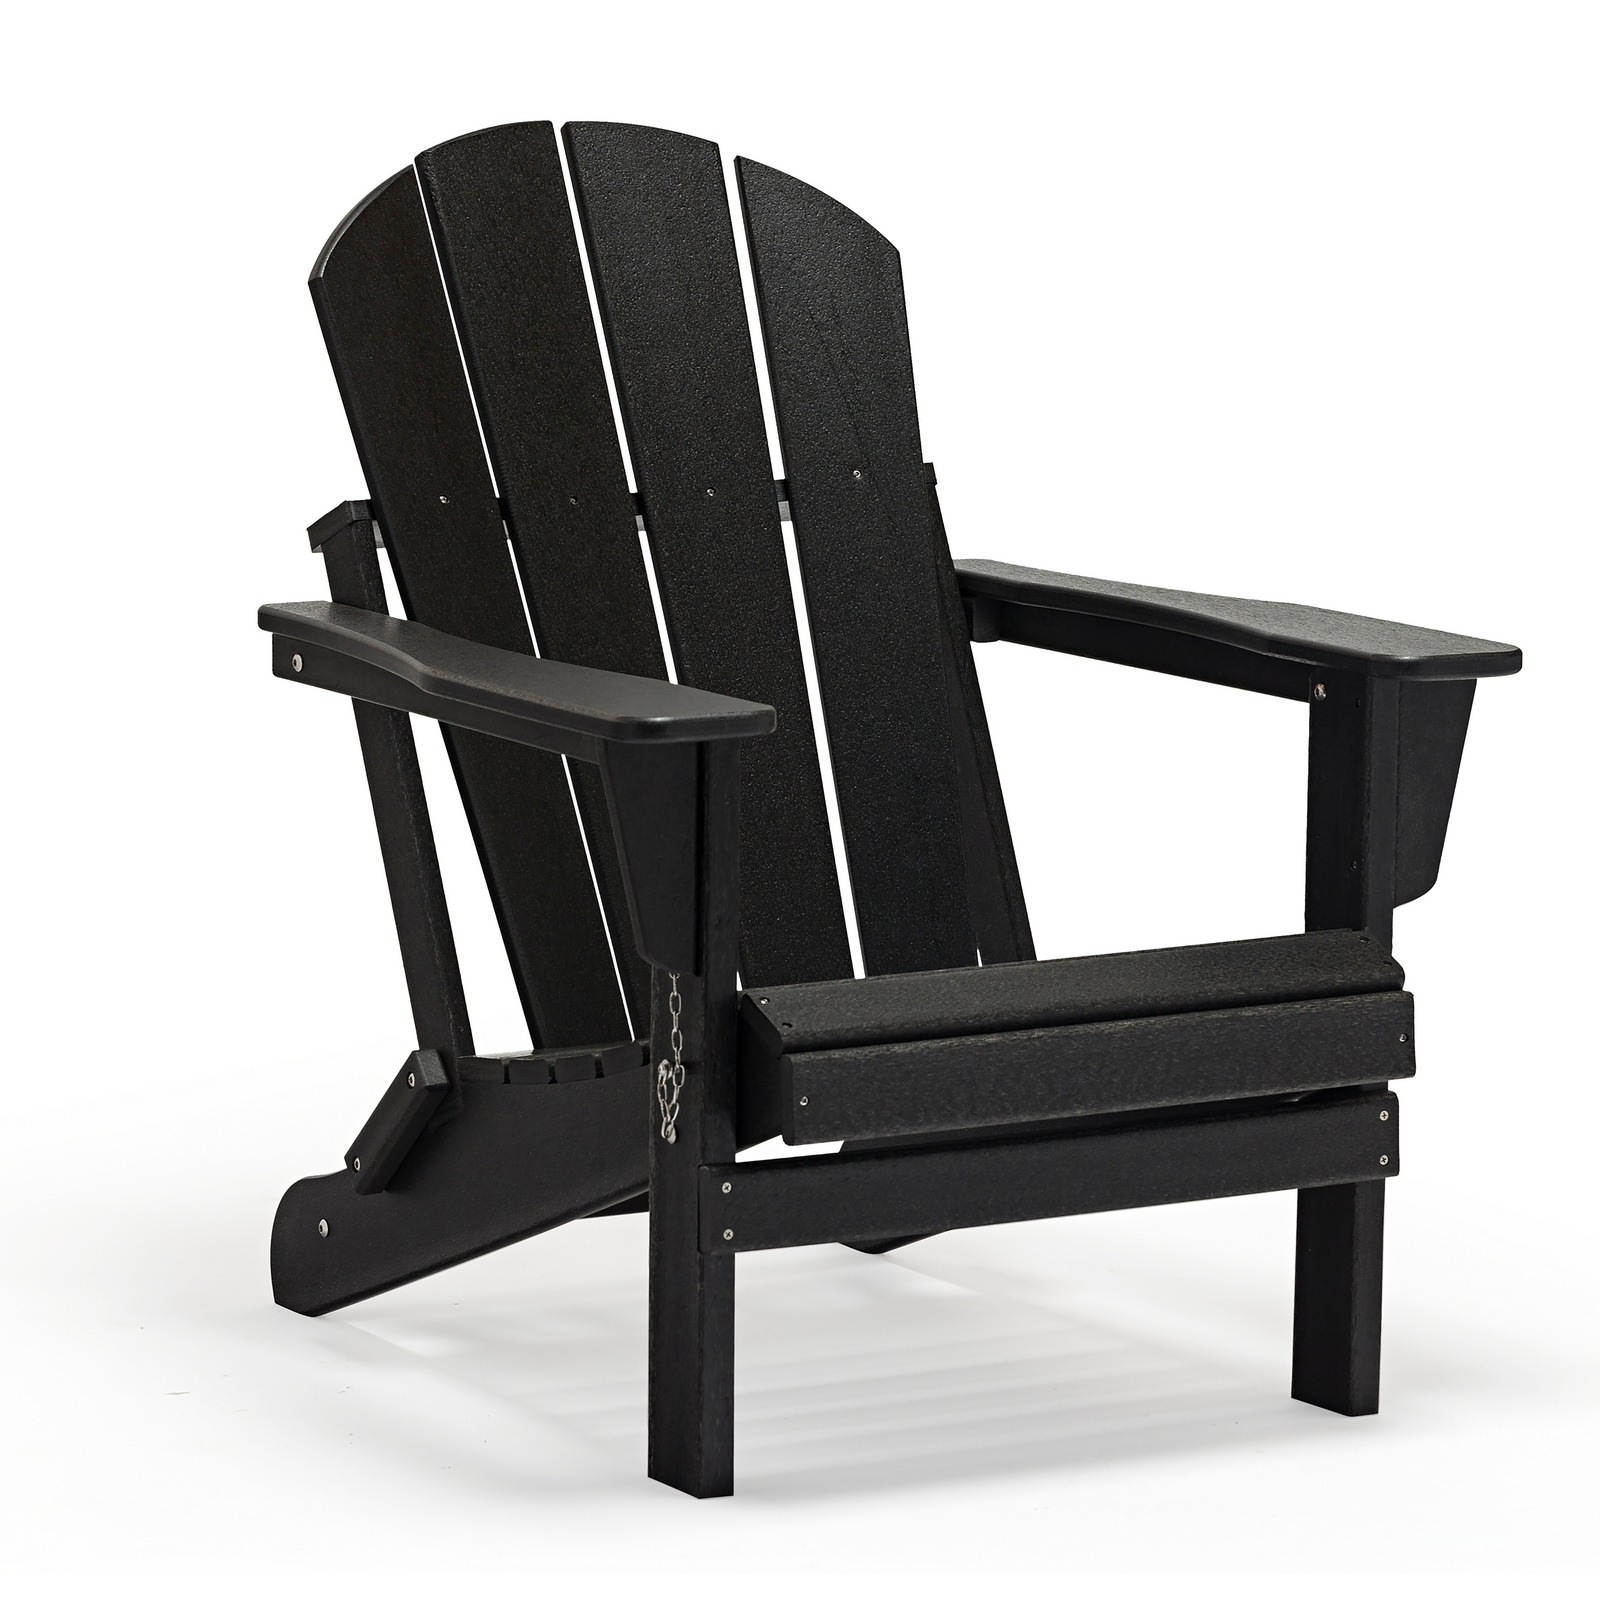 Primary image for BLACK Patio Adirondack Chair Folding Outdoor Poly Seat Lounge Garden Deck Porch